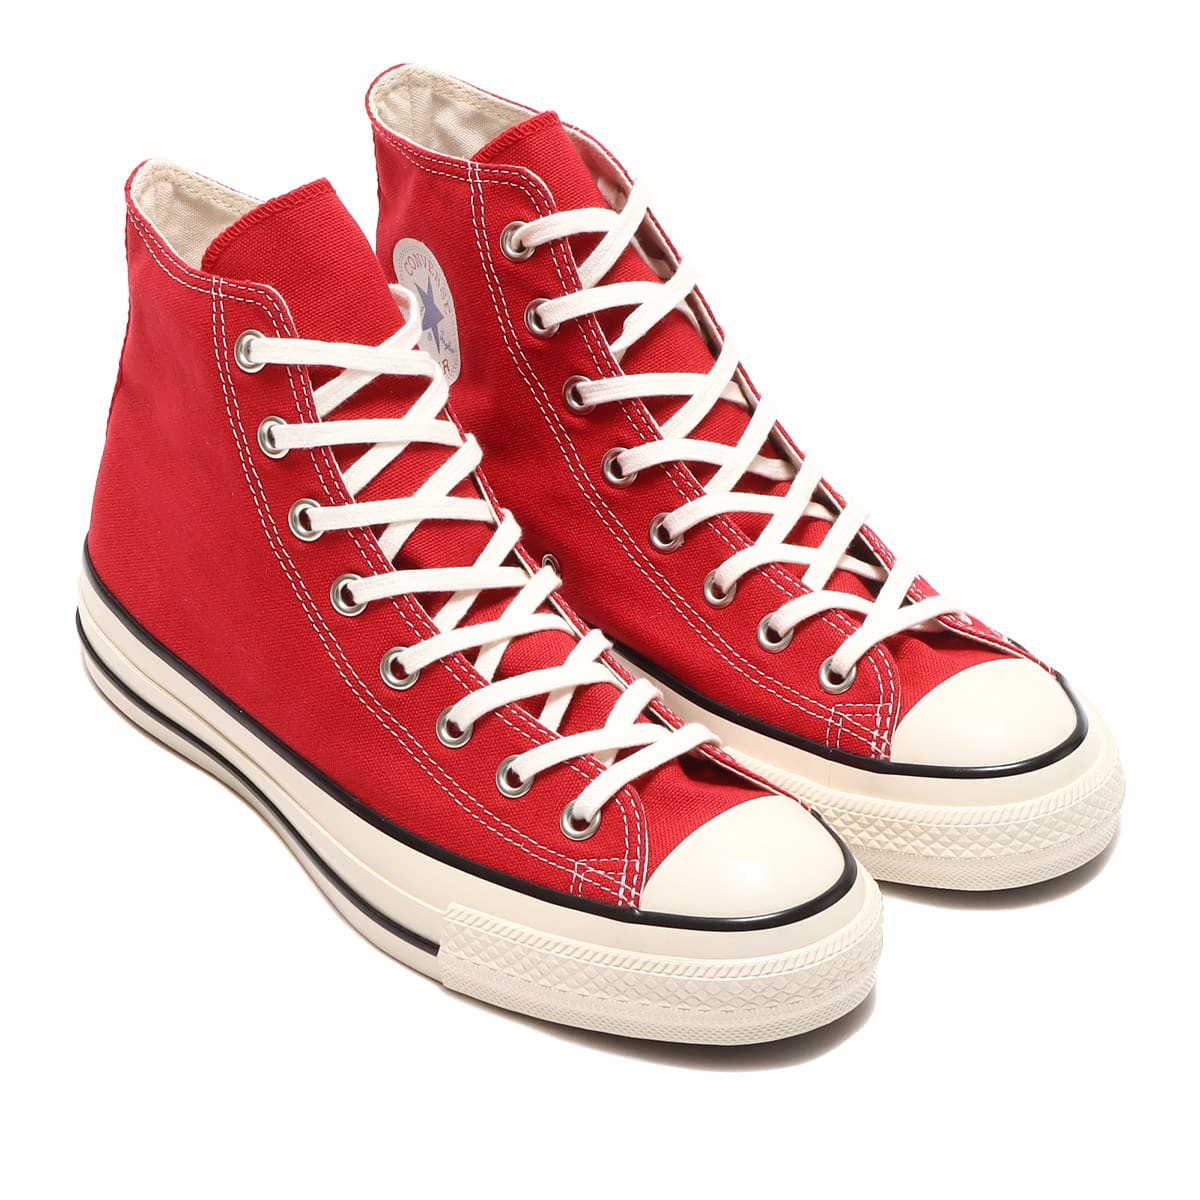 CONVERSE ALL STAR US HI CLASSIC RED 23SS-I_photo_large